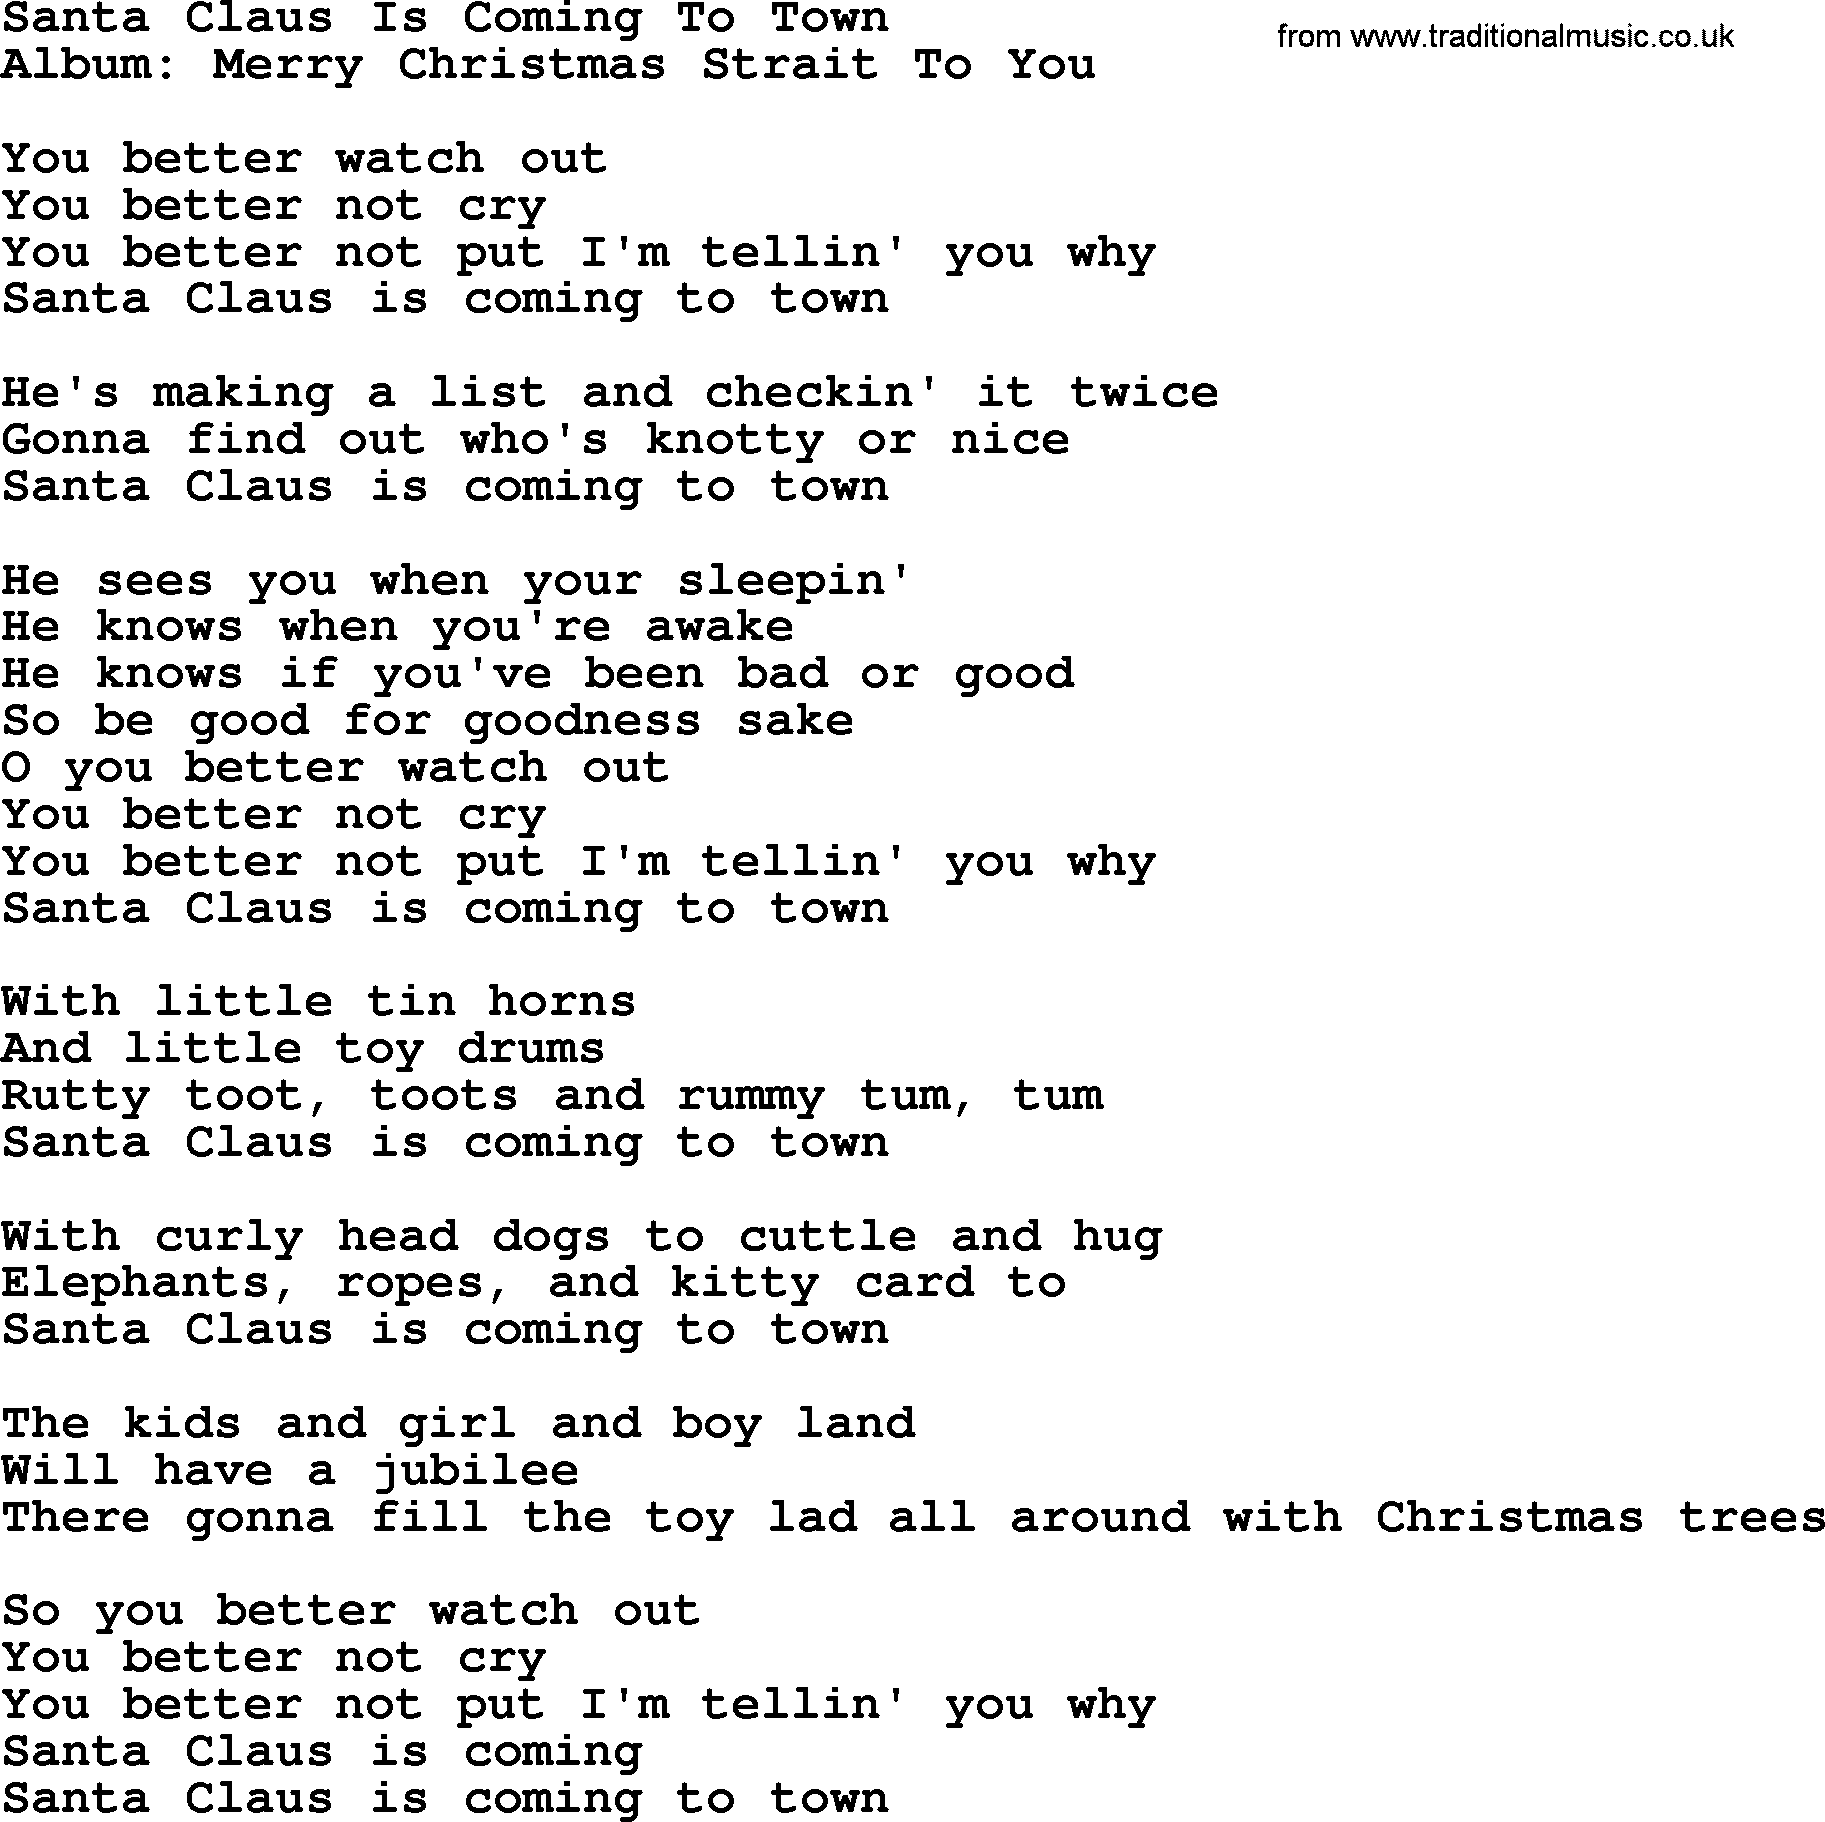 Santa Claus Is Coming To Town, by Strait lyrics